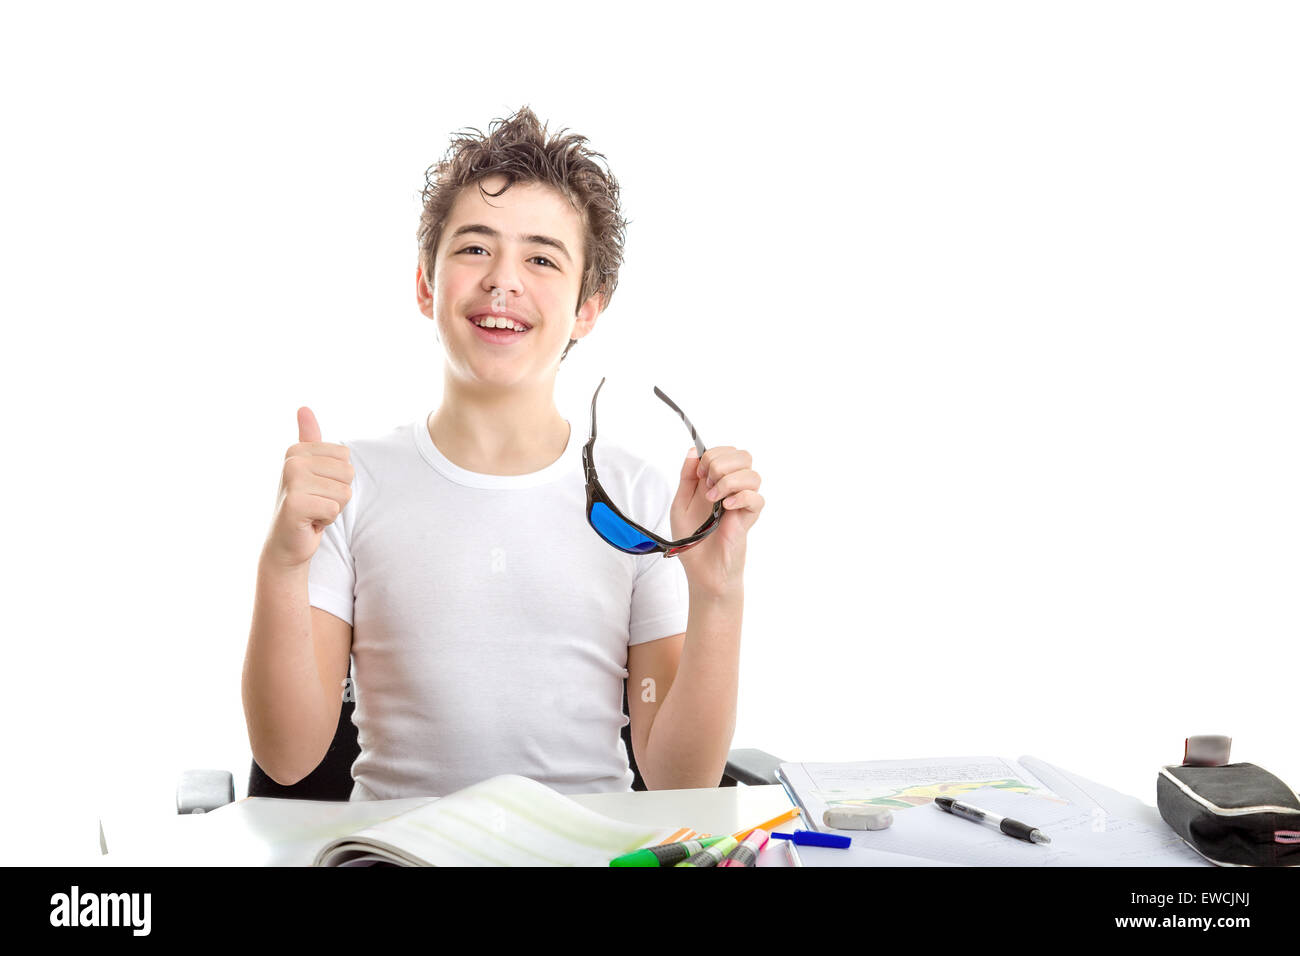 Caucasian smooth-skinned boy makes success gesture with right thumb up holding black plastic 3D Cinema eyeglasses while doing homework Stock Photo